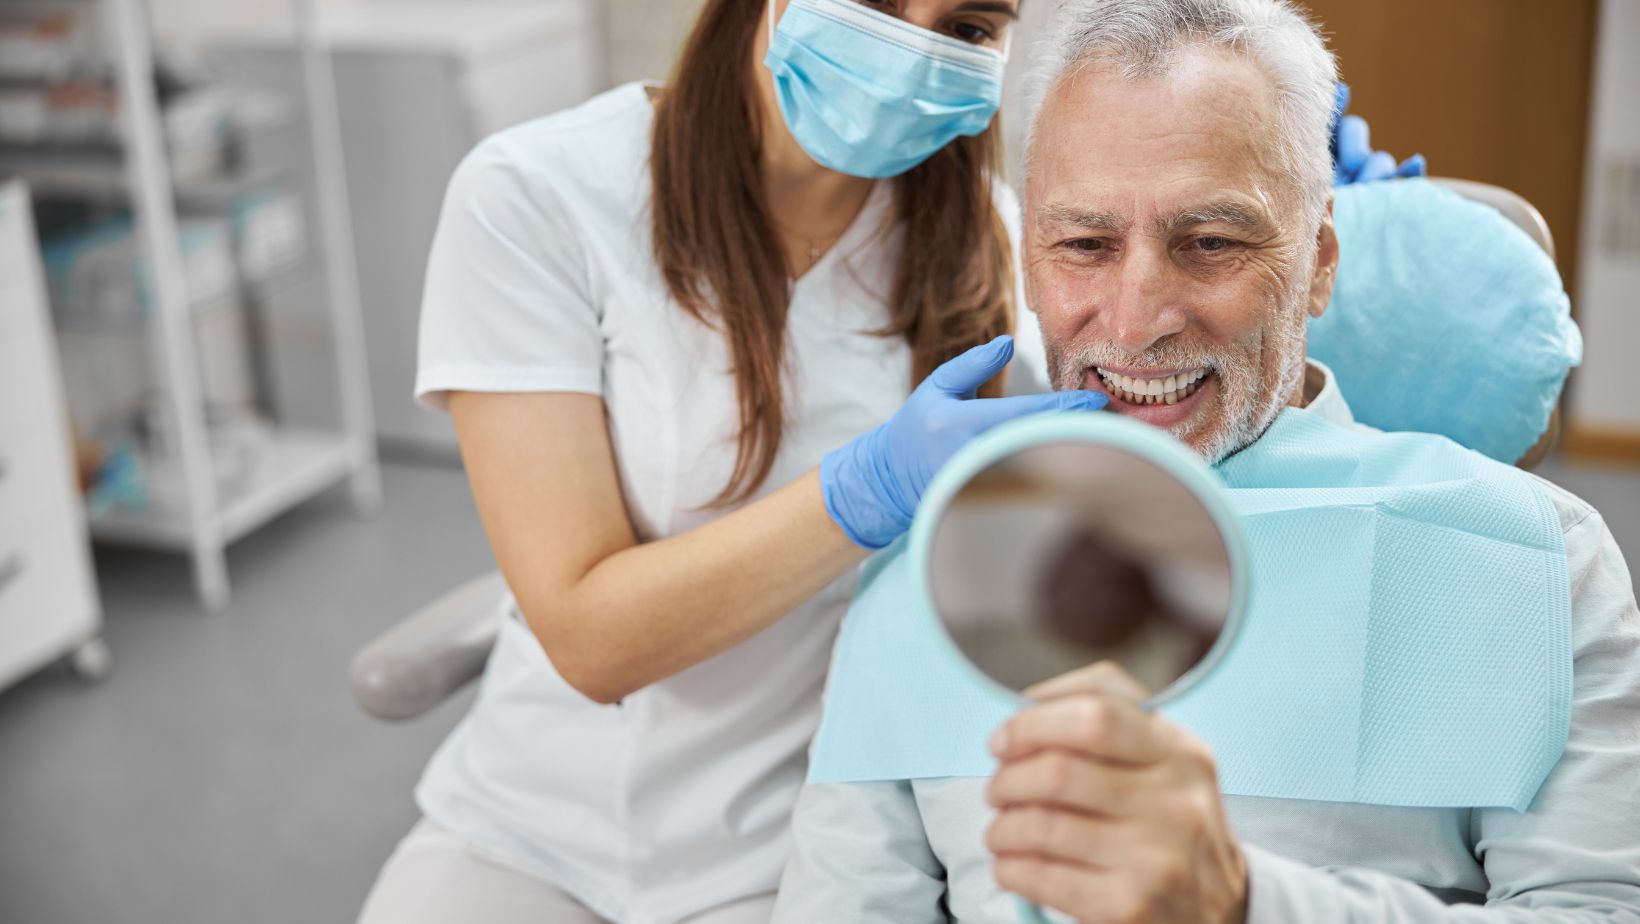 What Are Dental Implants Considered Under Insurance